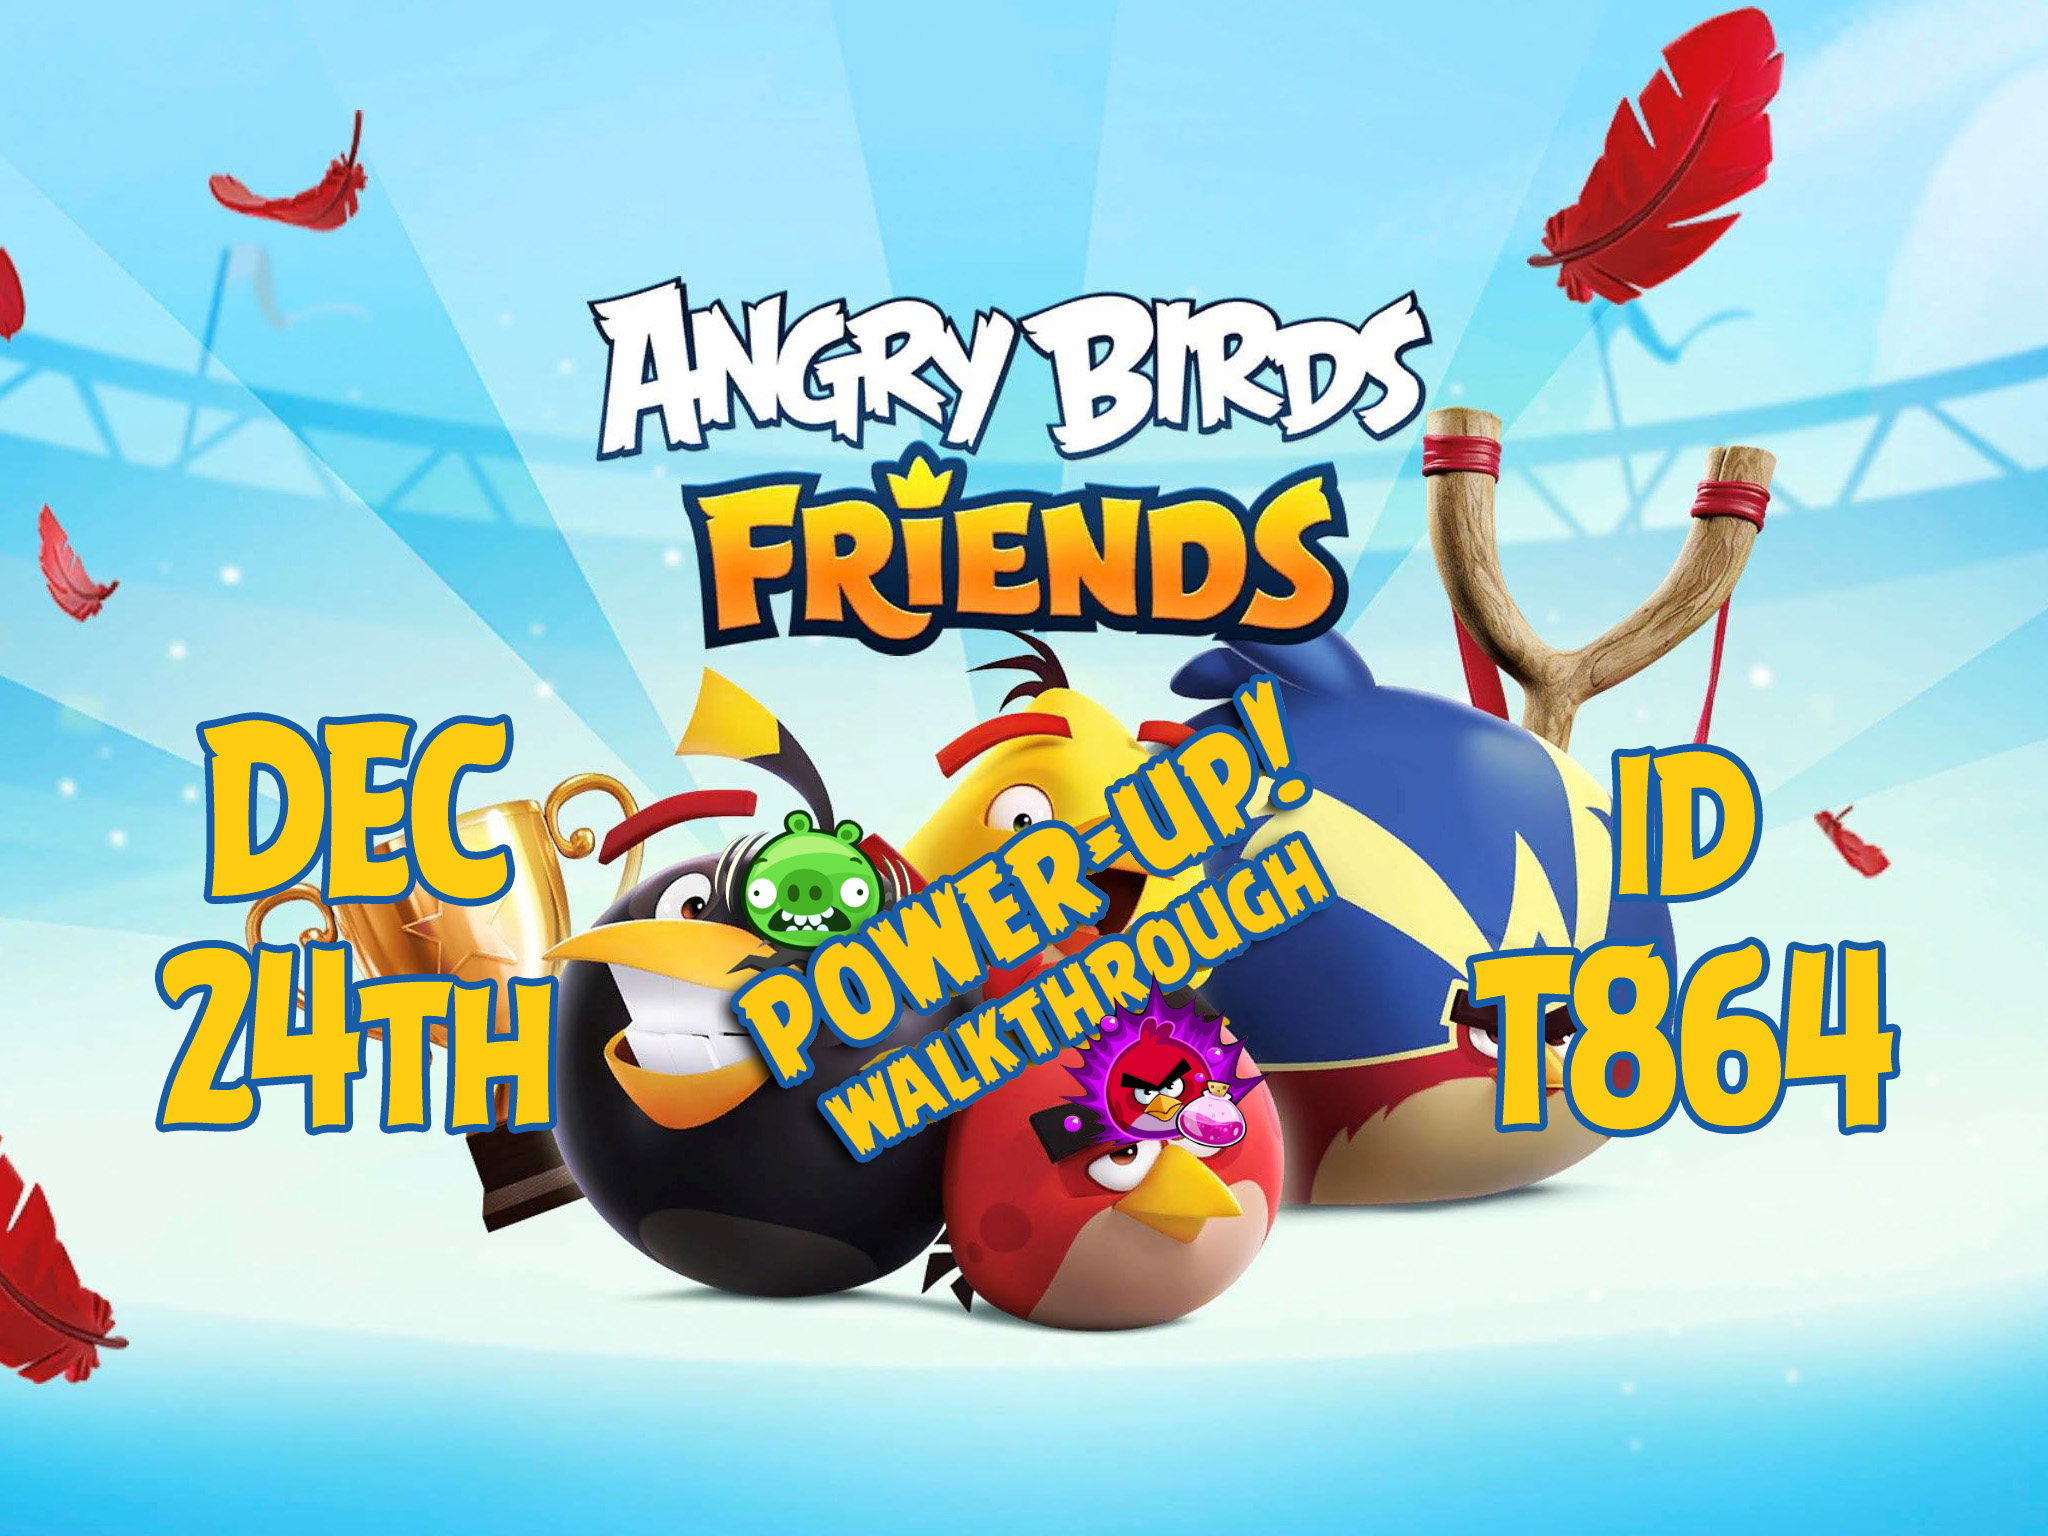 Angry-Birds-Friends-Tournament-T864-Feature-Image-PU